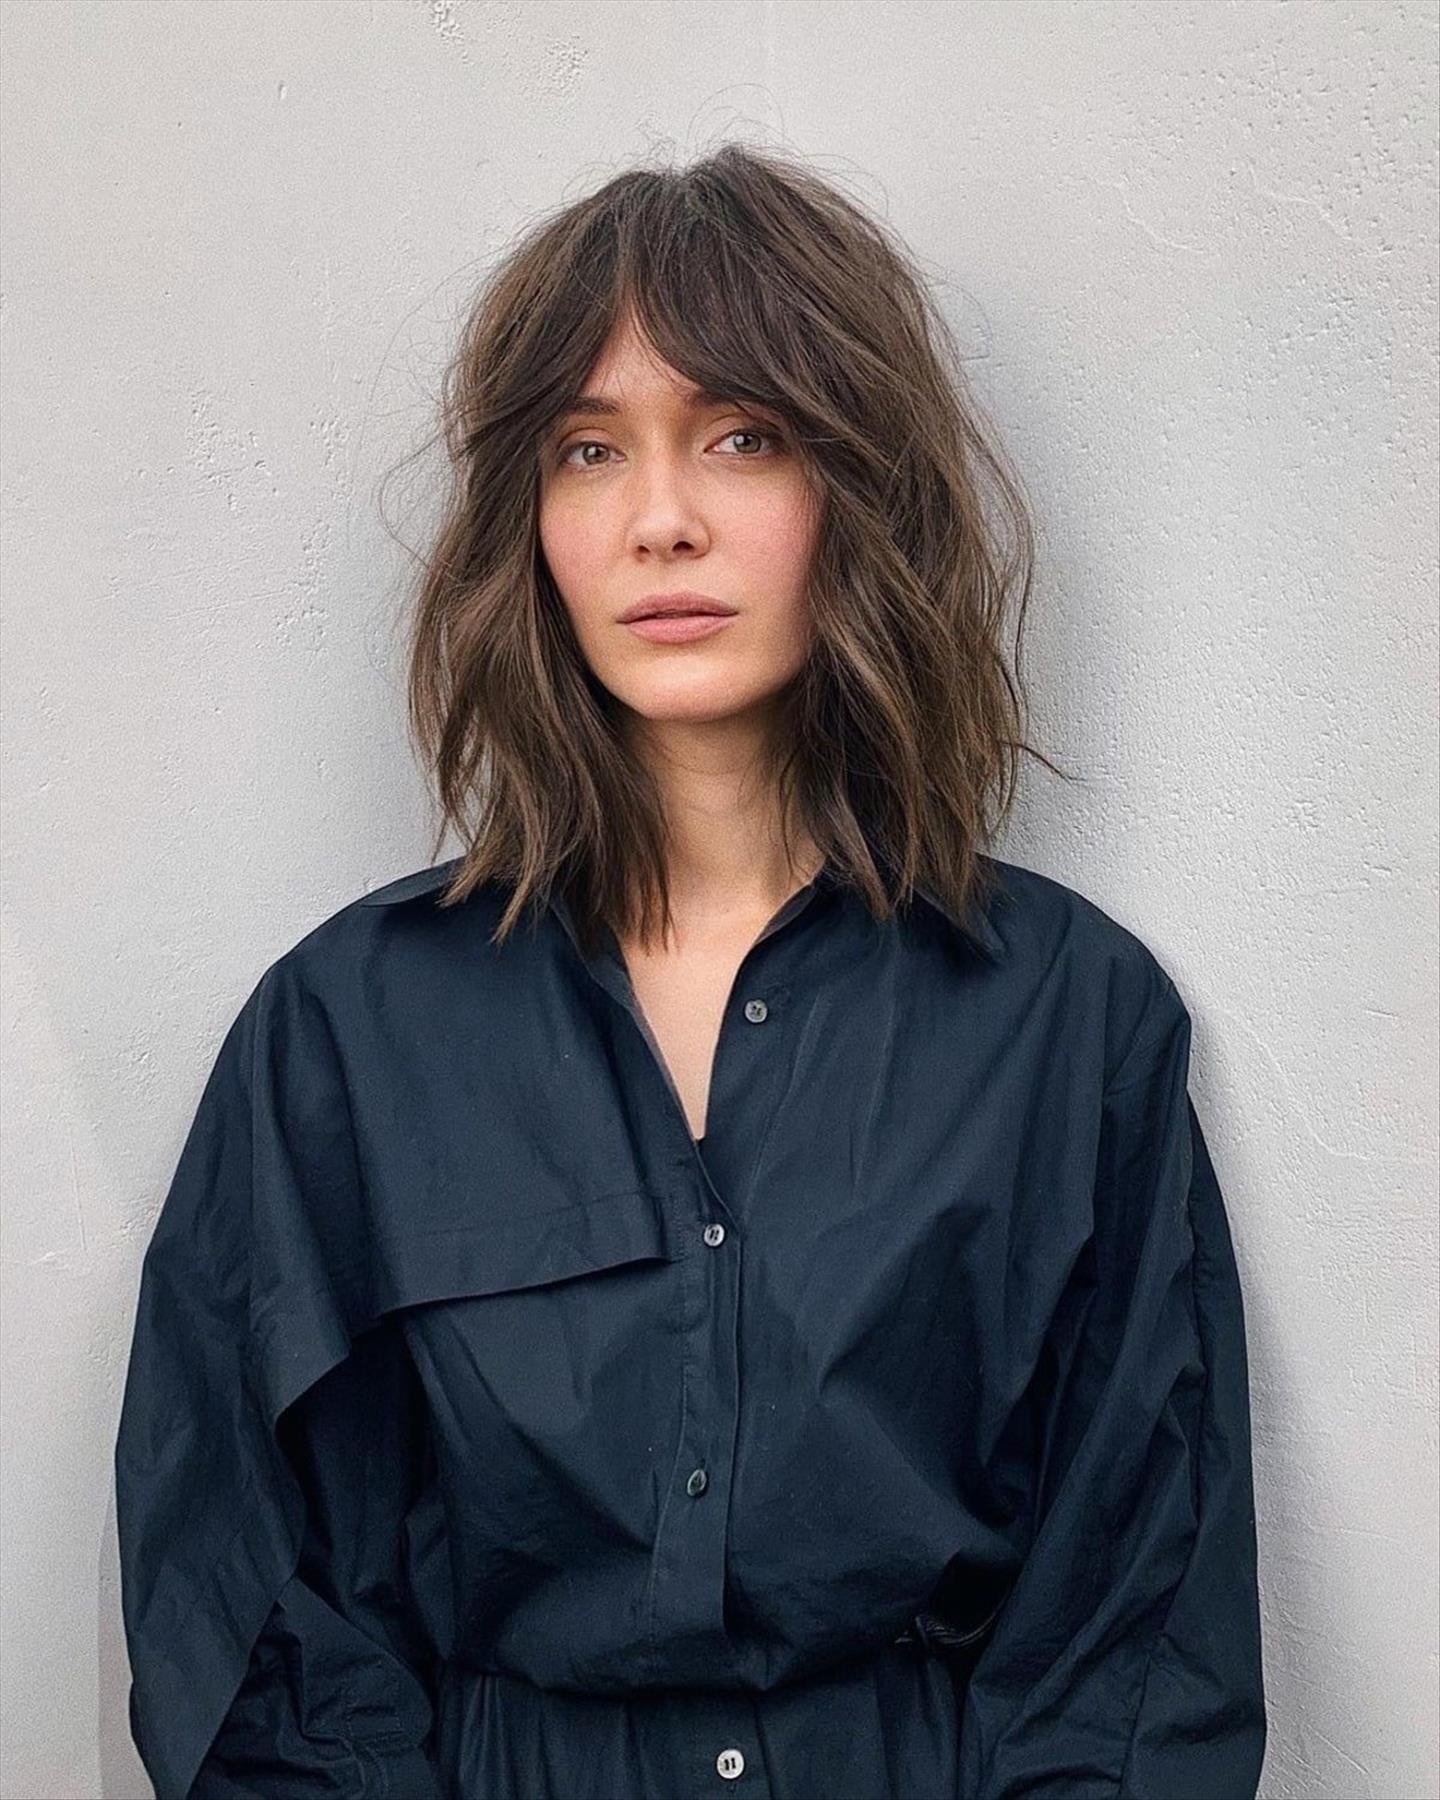 Cool shoulder-length haircuts with curtain bangs to try in 2024